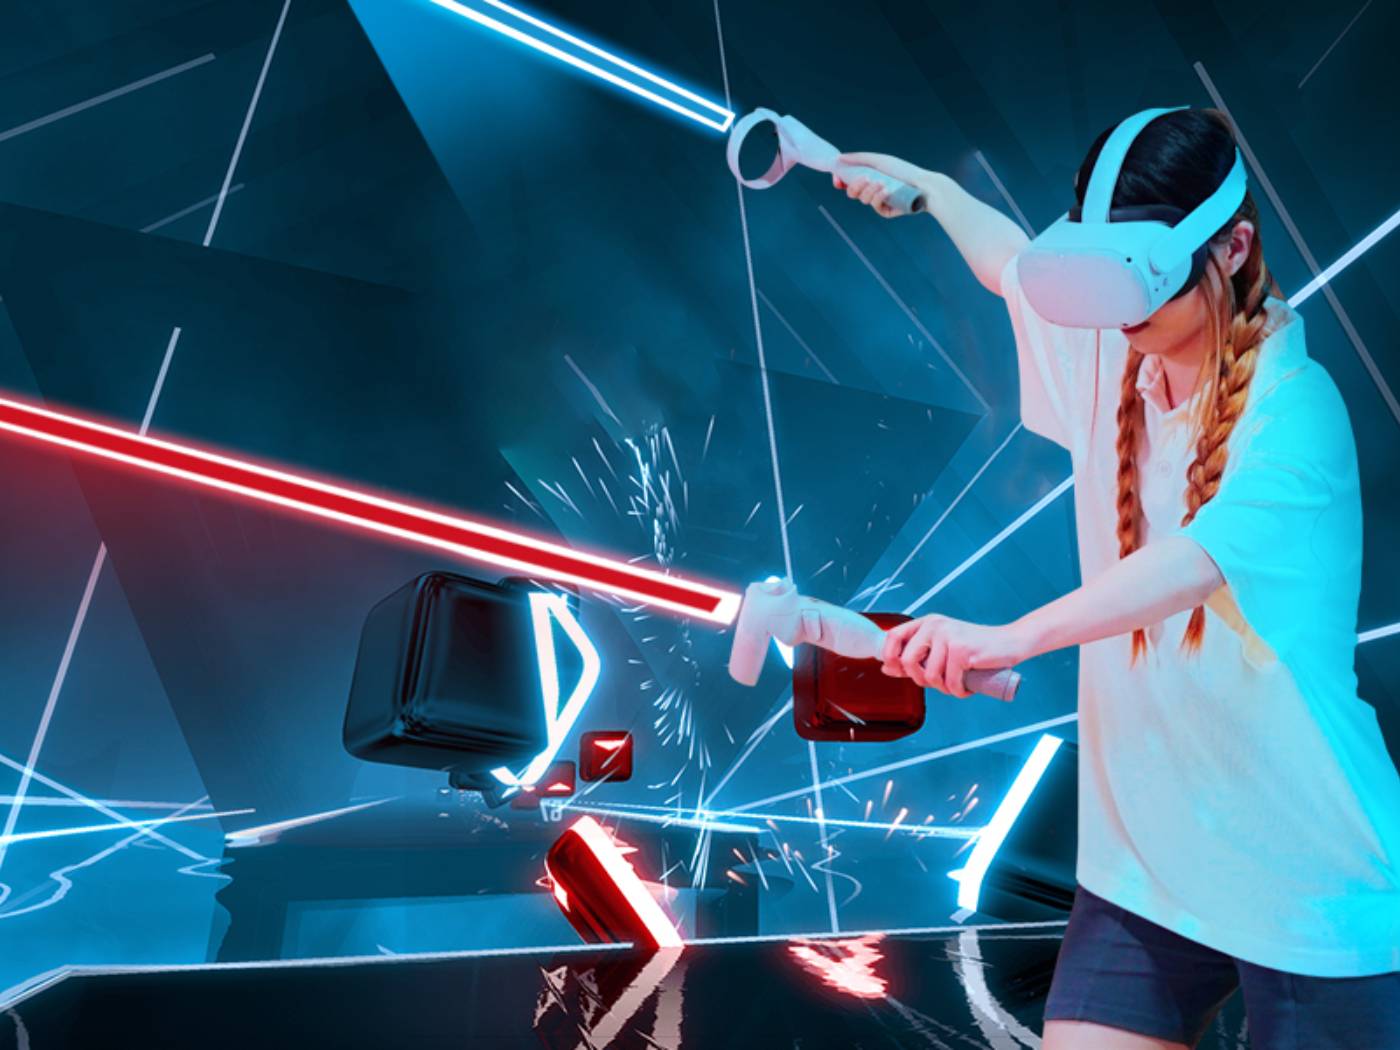 Benefits of playing Beat Saber and how to improve the skill